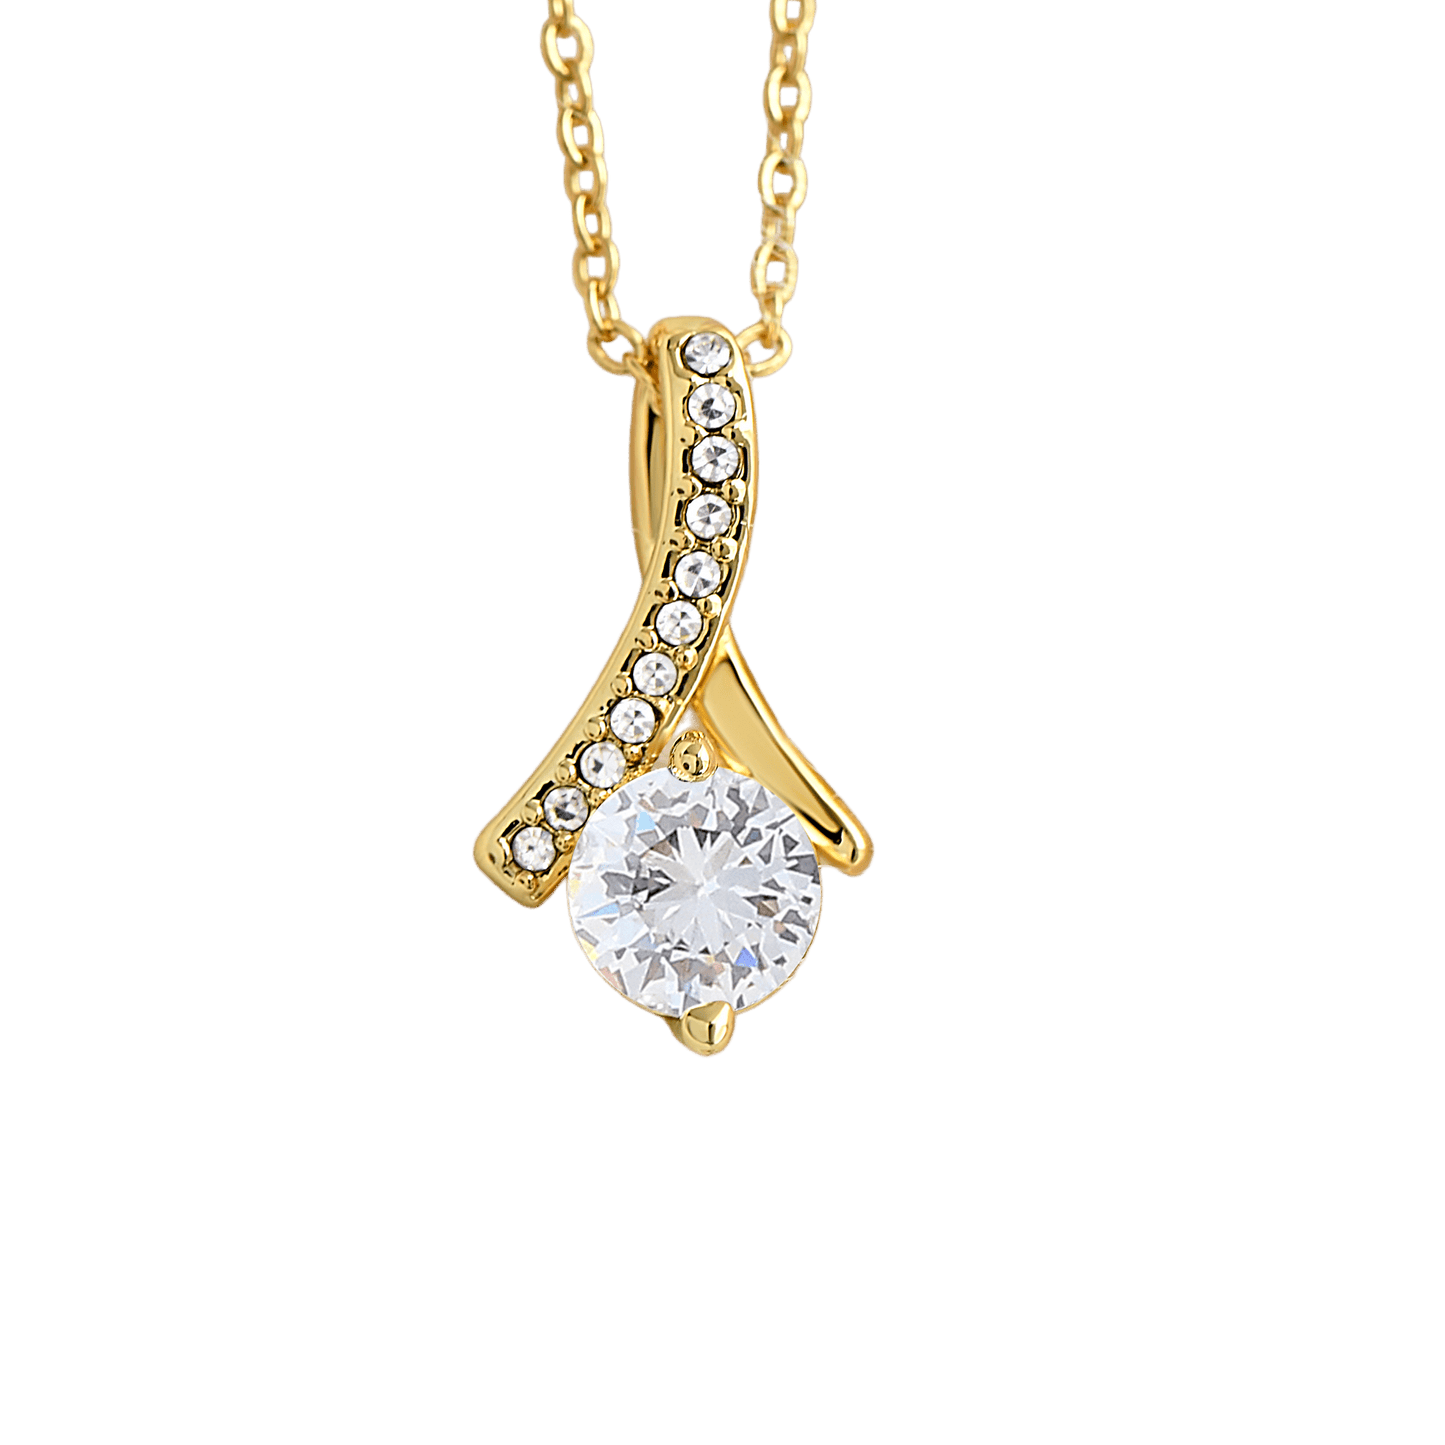 Aliyannah™ Alluring Beauty Necklace - 14k White Gold/18k Yellow Gold Finish